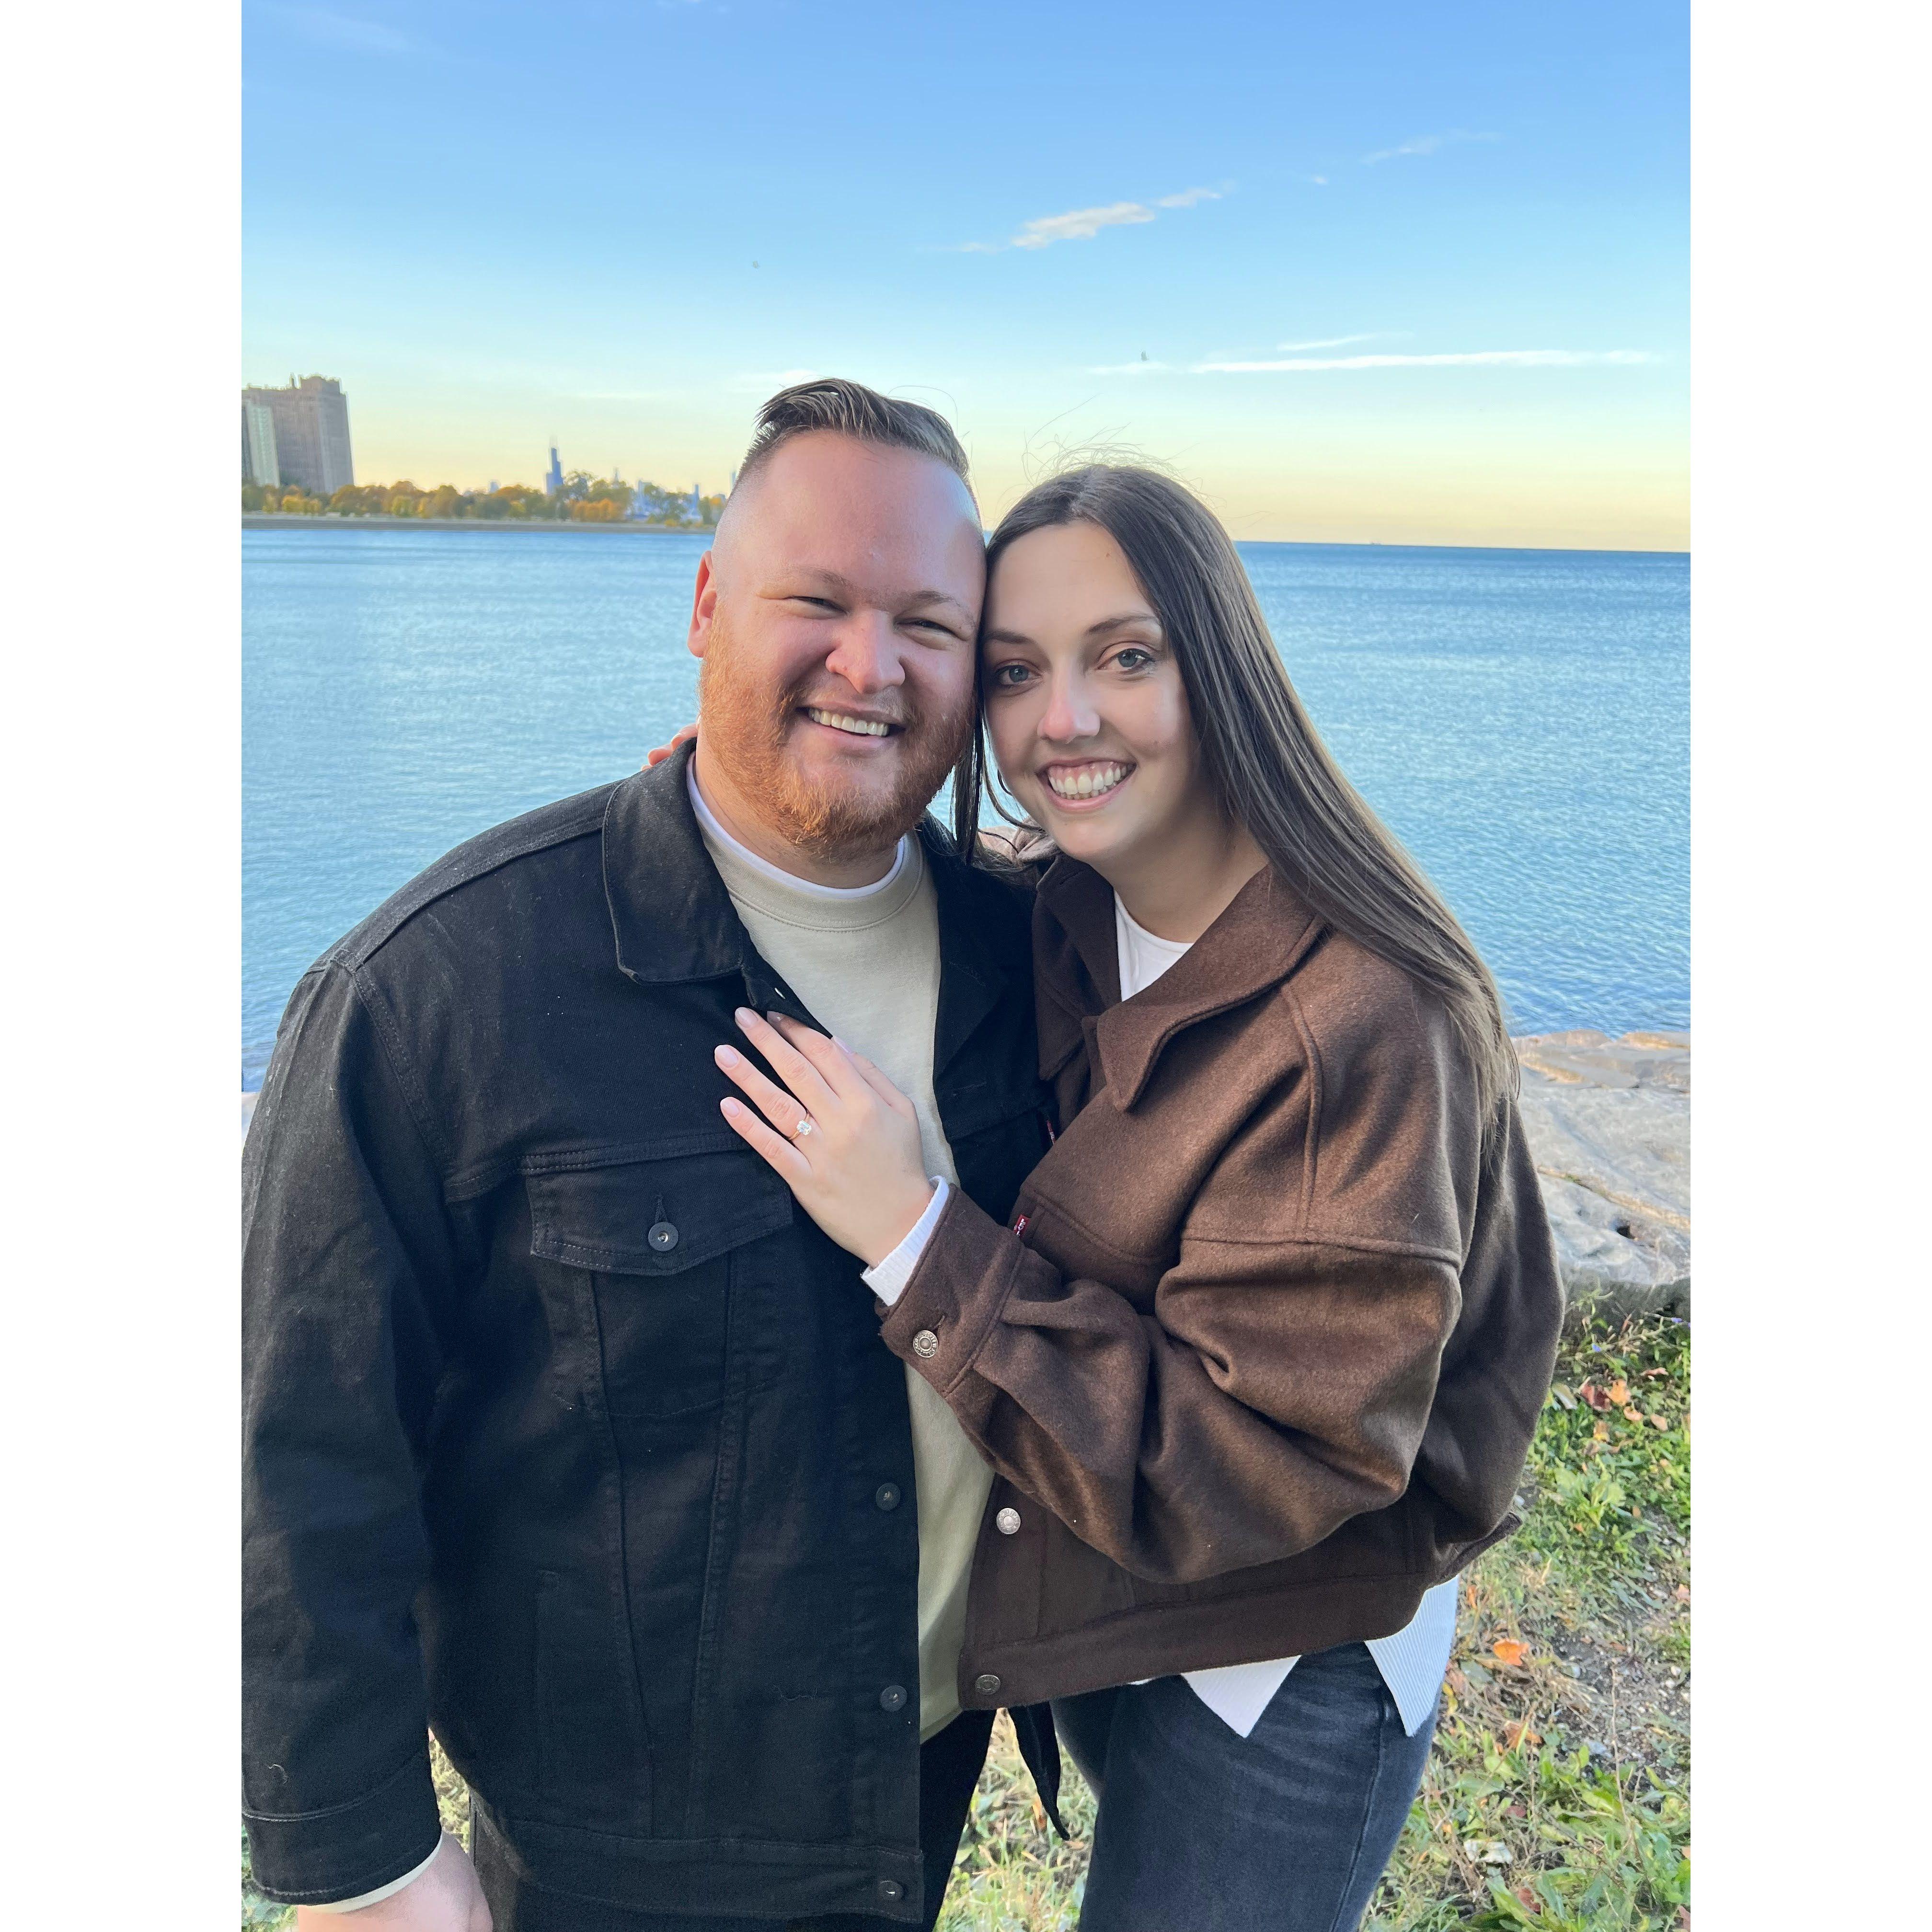 Right after Sean proposed at Promontory Point on October 15th, 2022. One of the most beautiful fall days that we'll never forget.